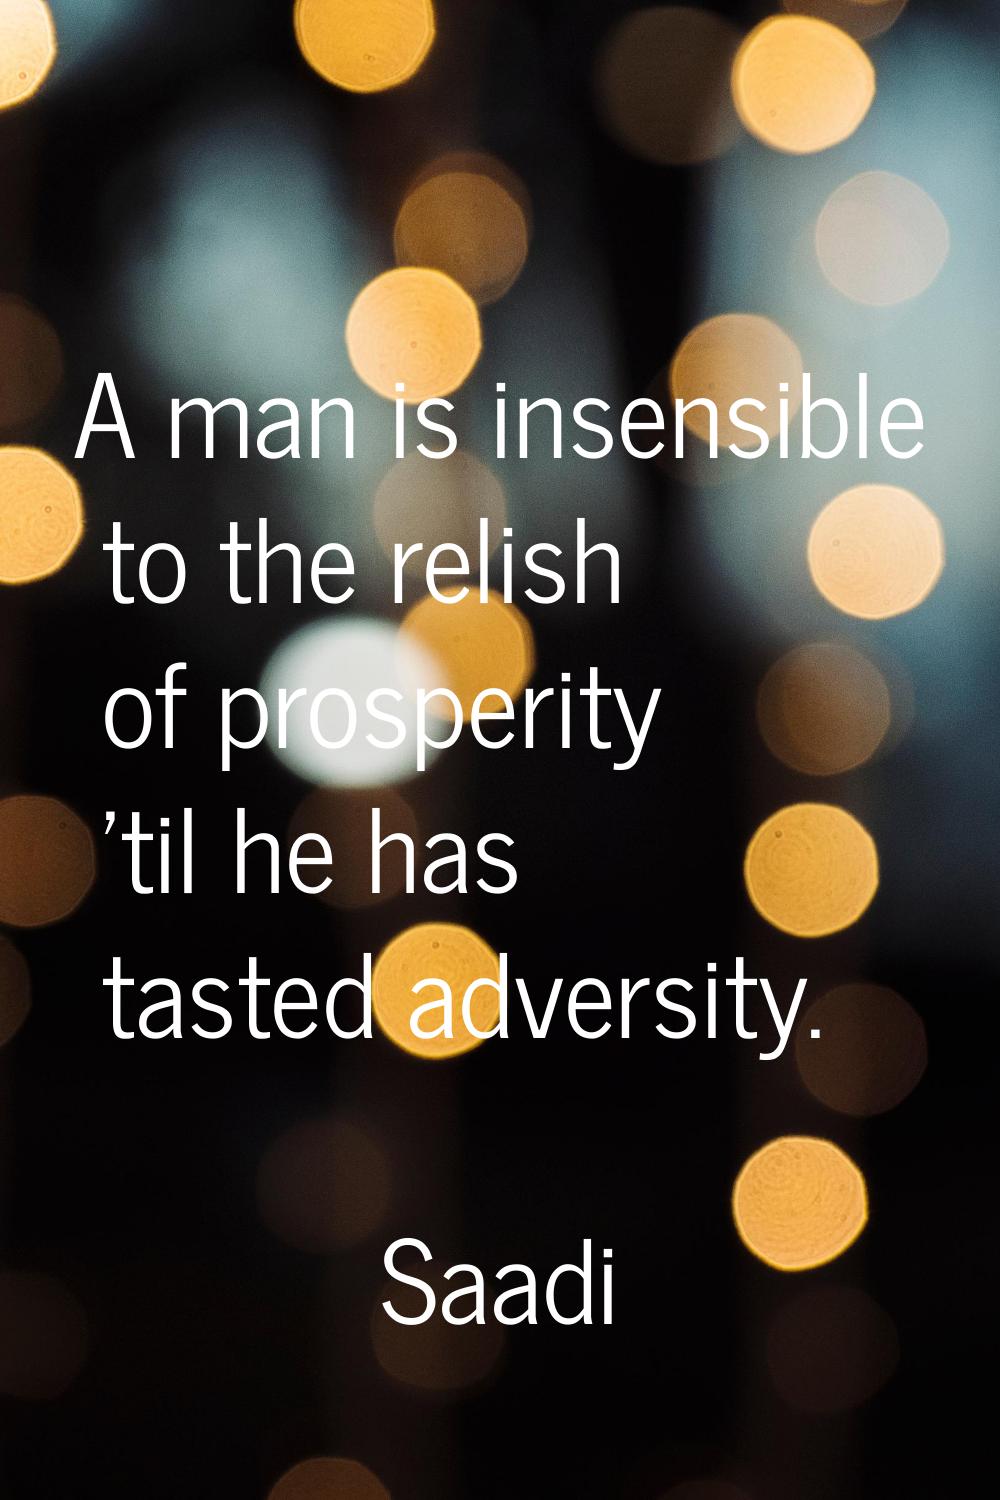 A man is insensible to the relish of prosperity 'til he has tasted adversity.